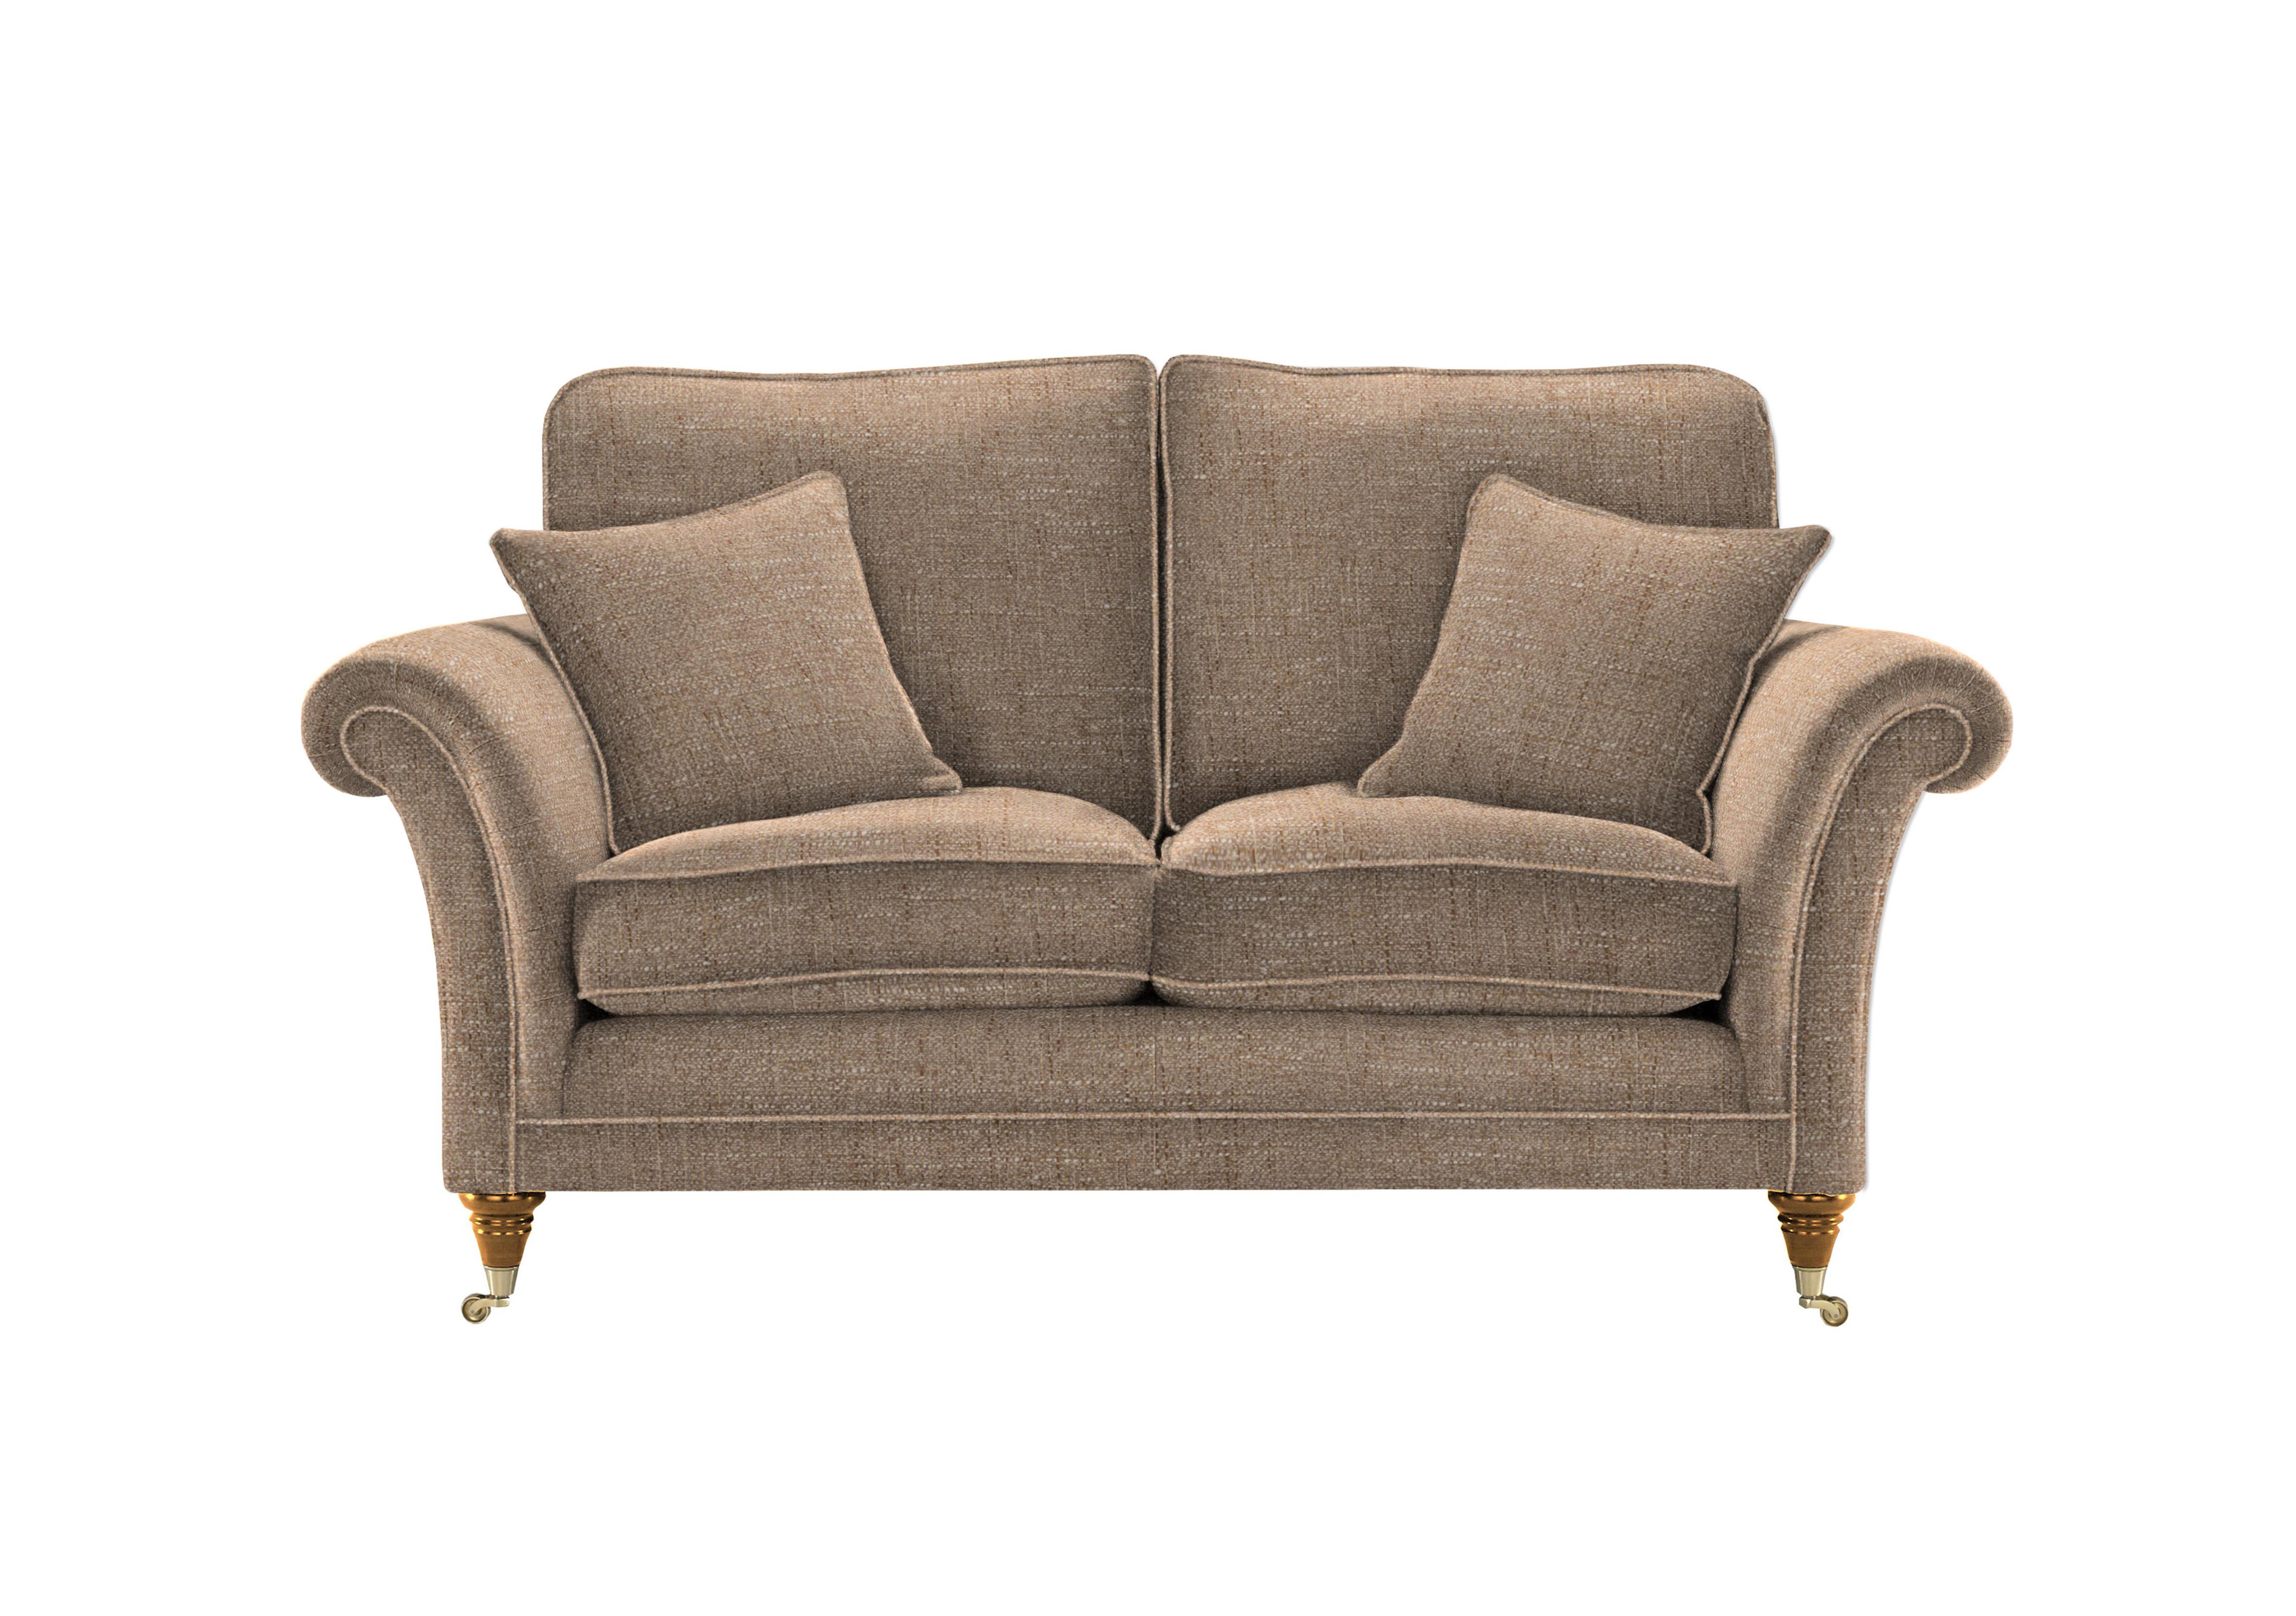 Burghley 2 Seater Fabric Sofa in 001408-0051 Country Oatmeal on Furniture Village